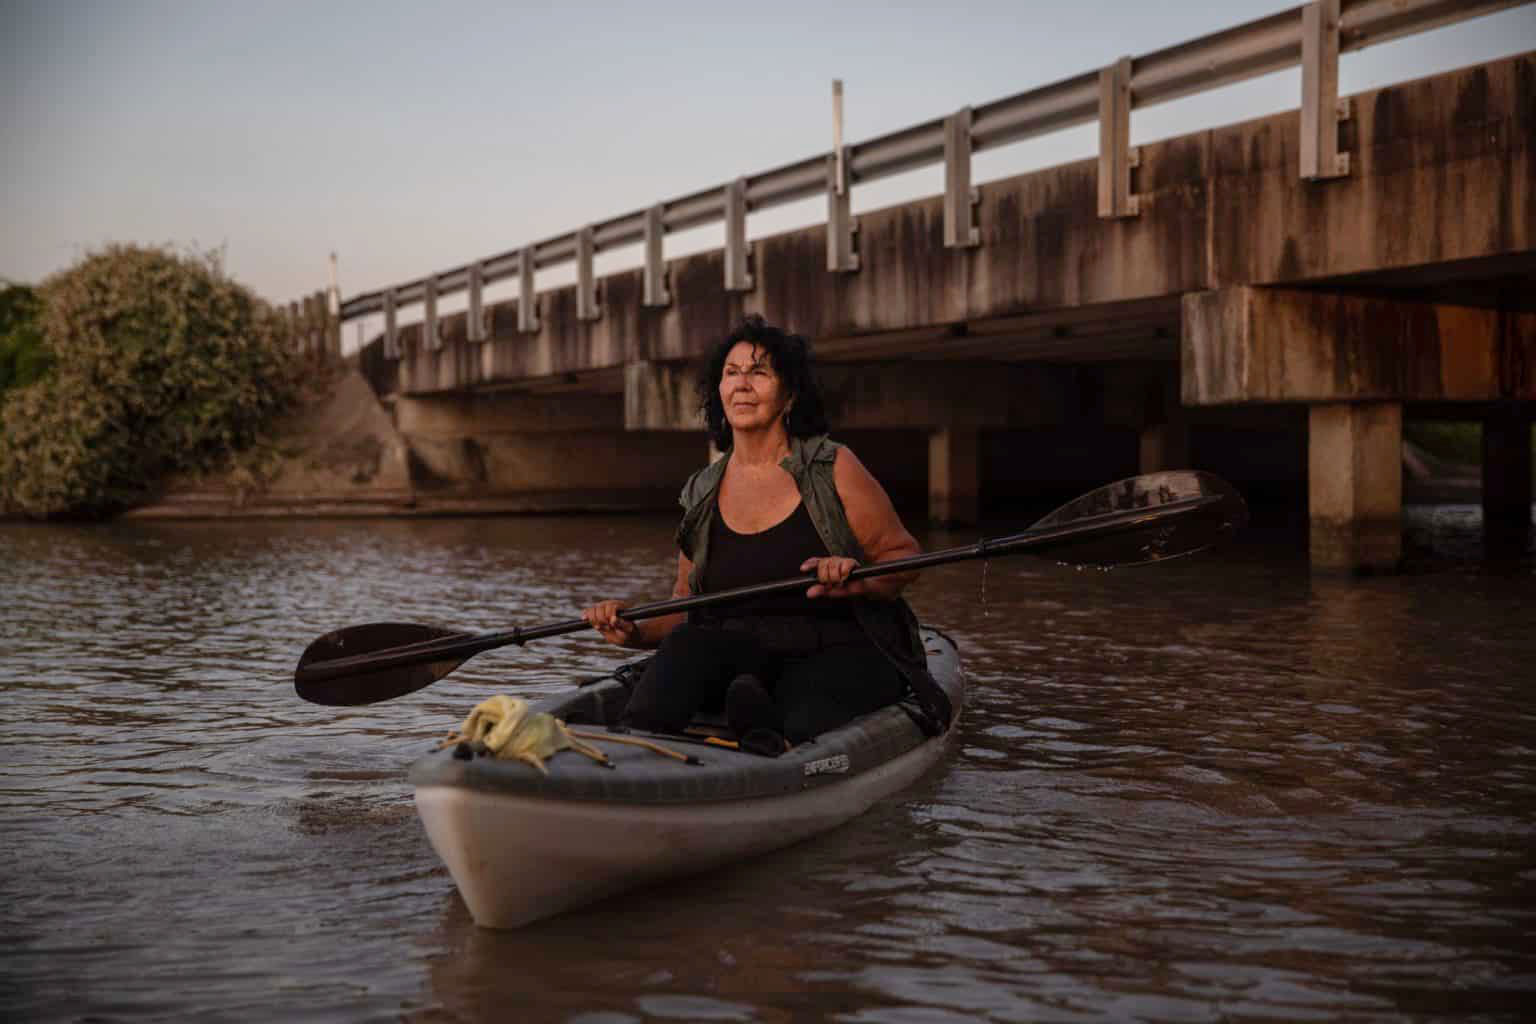 Diane Wilson investigating microplastic pollution on Cox’s Creek in the Texas Gulf Coast town of Point Comfort. She led a group of local residents in a successful courtroom assault on giant Formosa Plastics. (Tamir Kalifa)